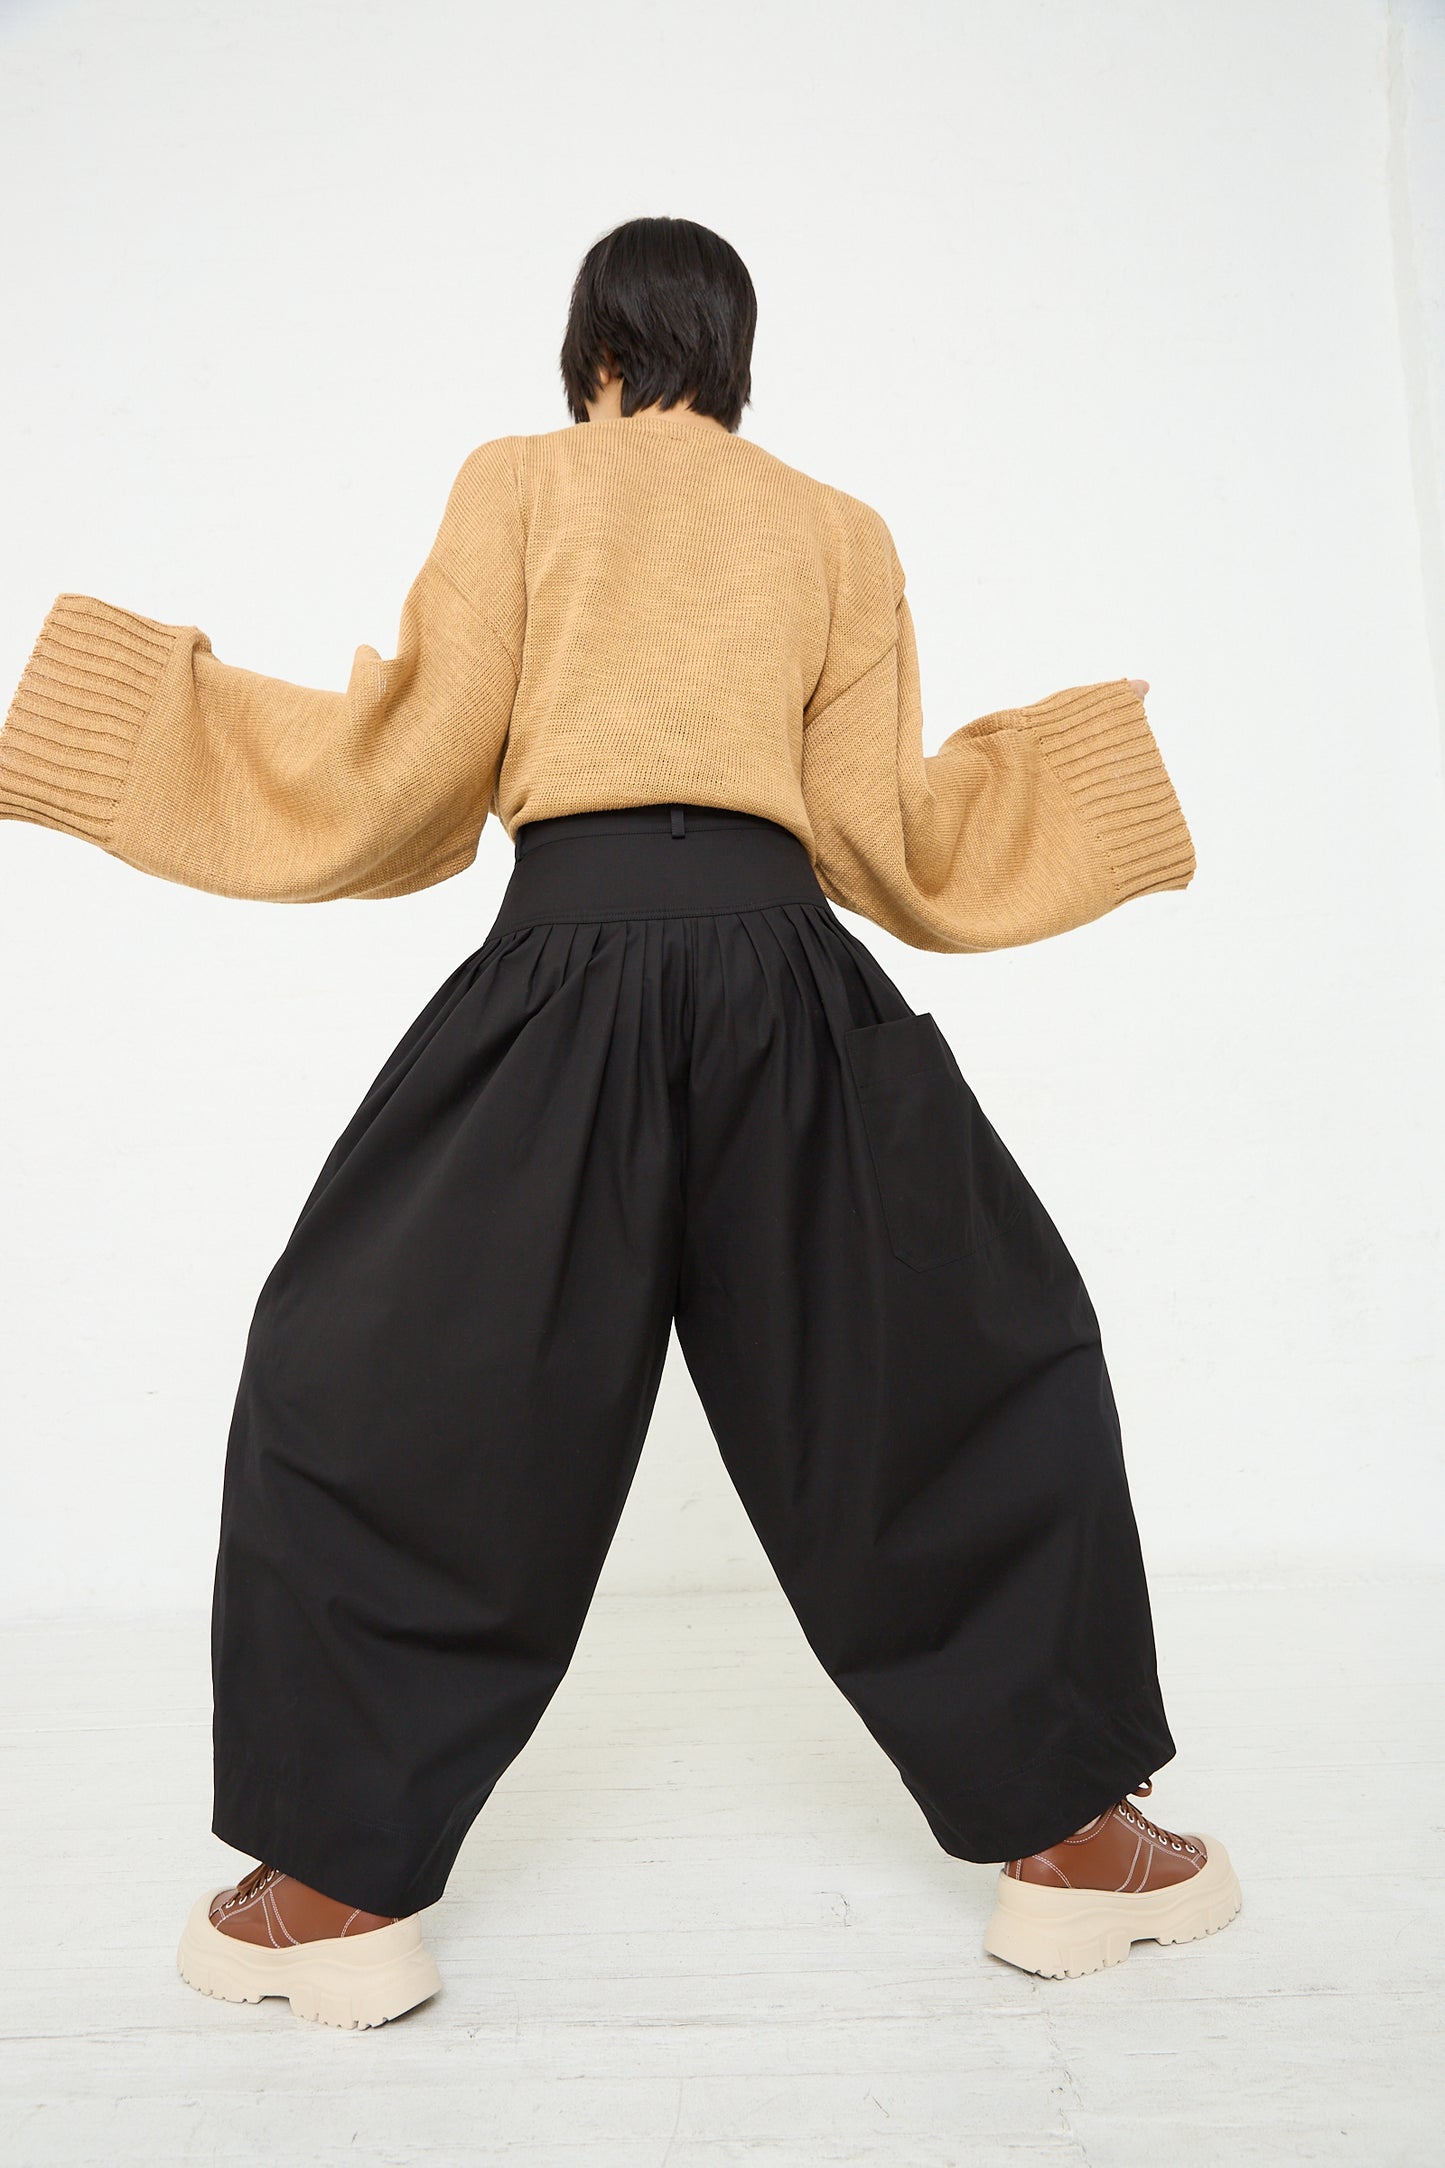 A woman in Niccolò Pasqualetti's Cotton Twill Luna Trouser in Black and a beige sweater. Back view.